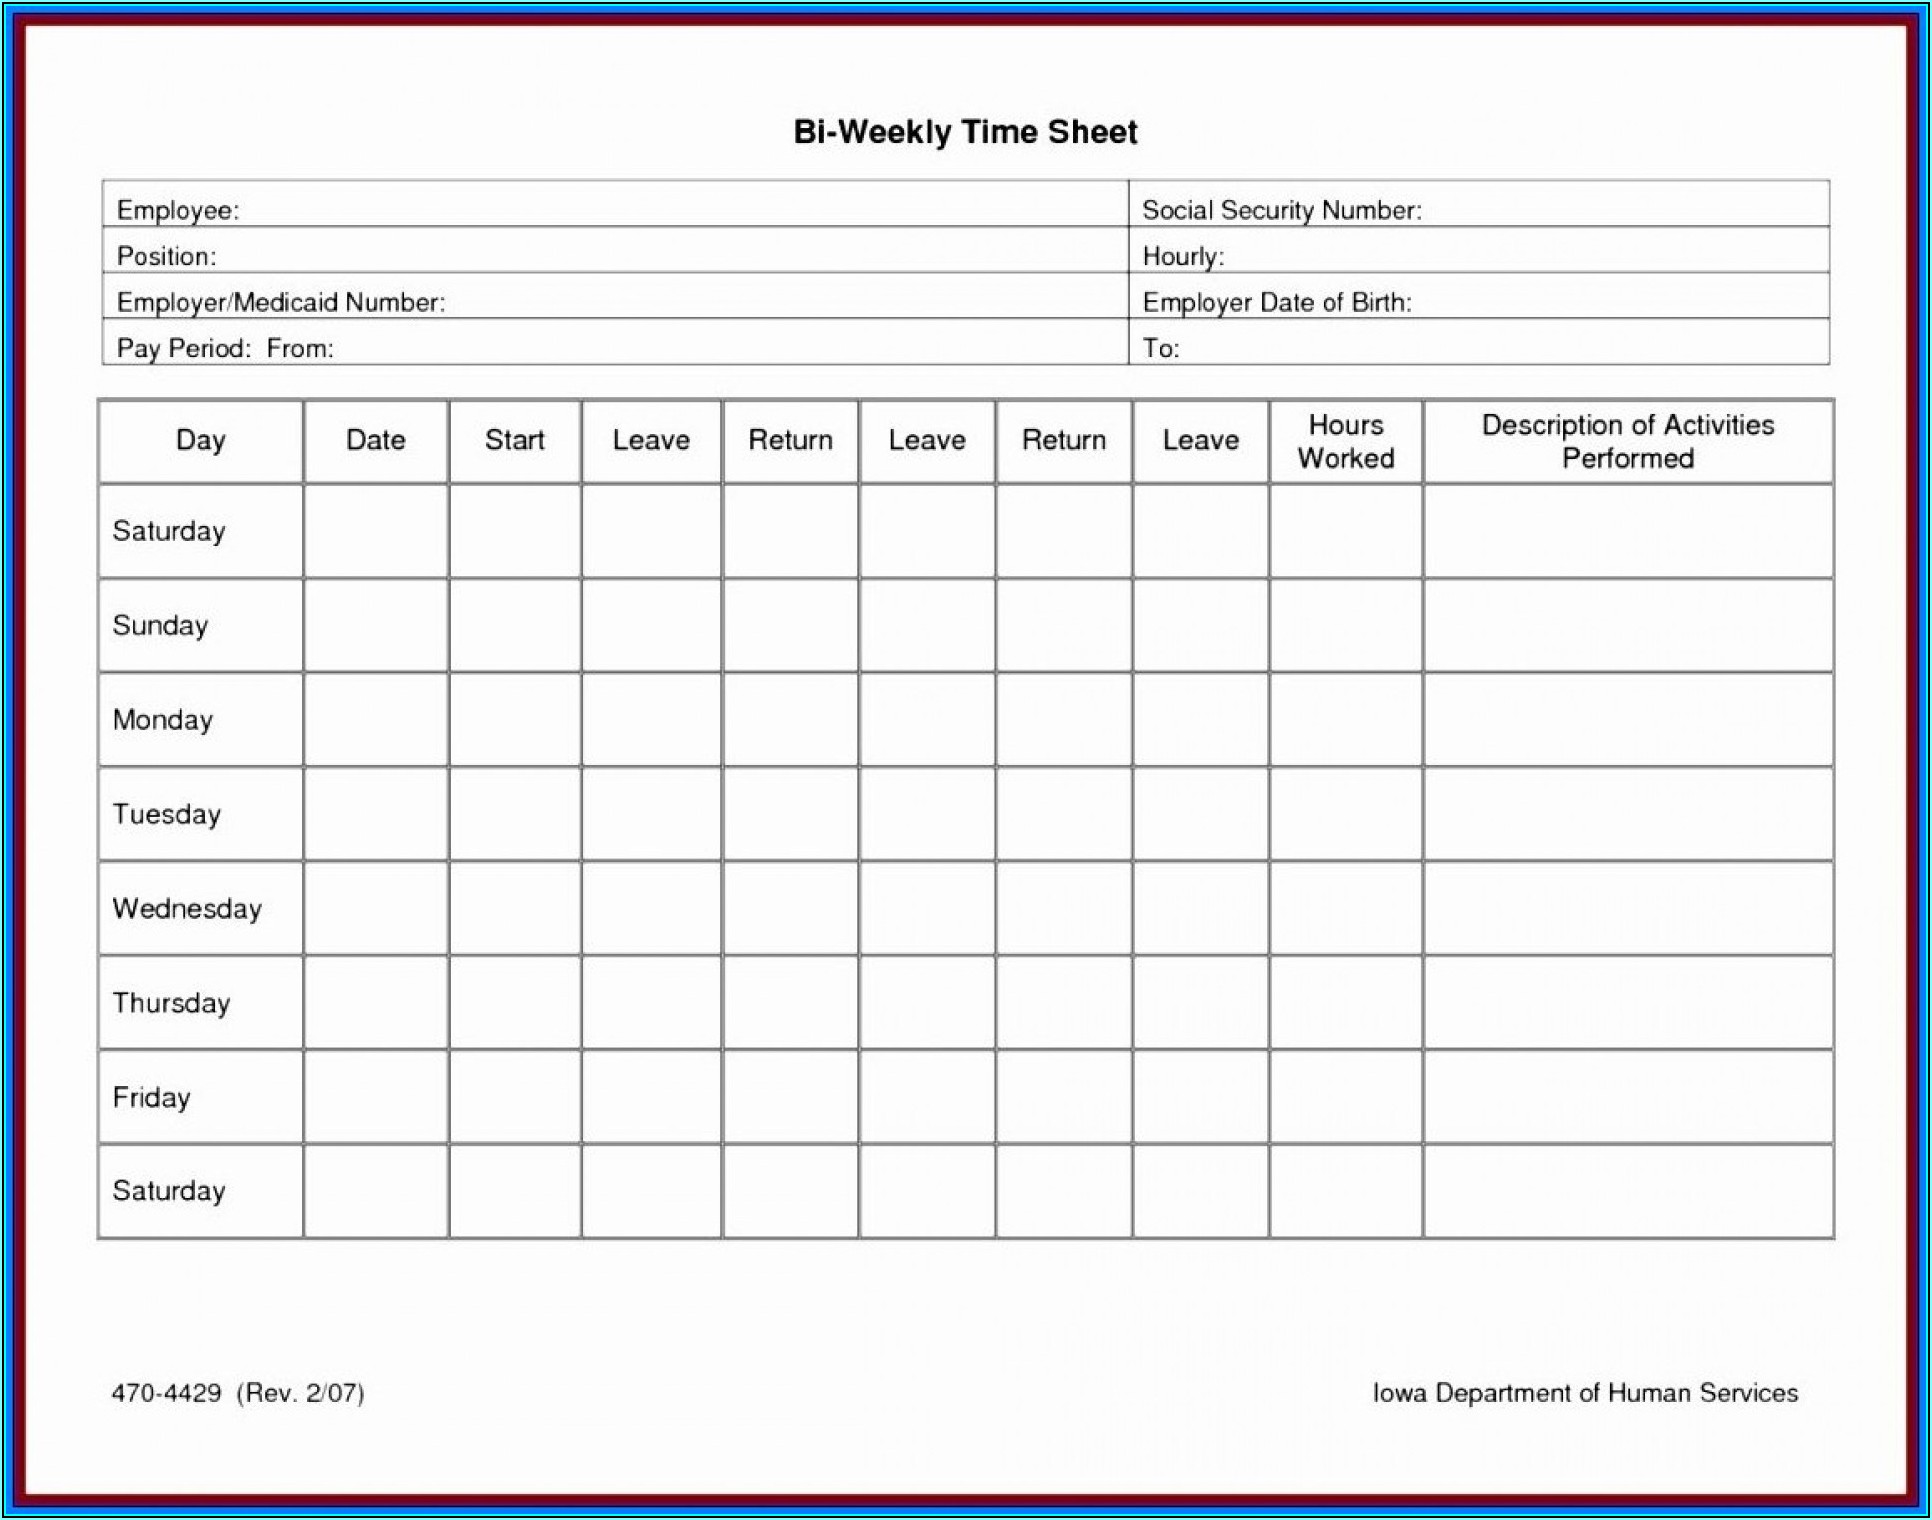 Weekly Timesheet Template For Multiple Employees